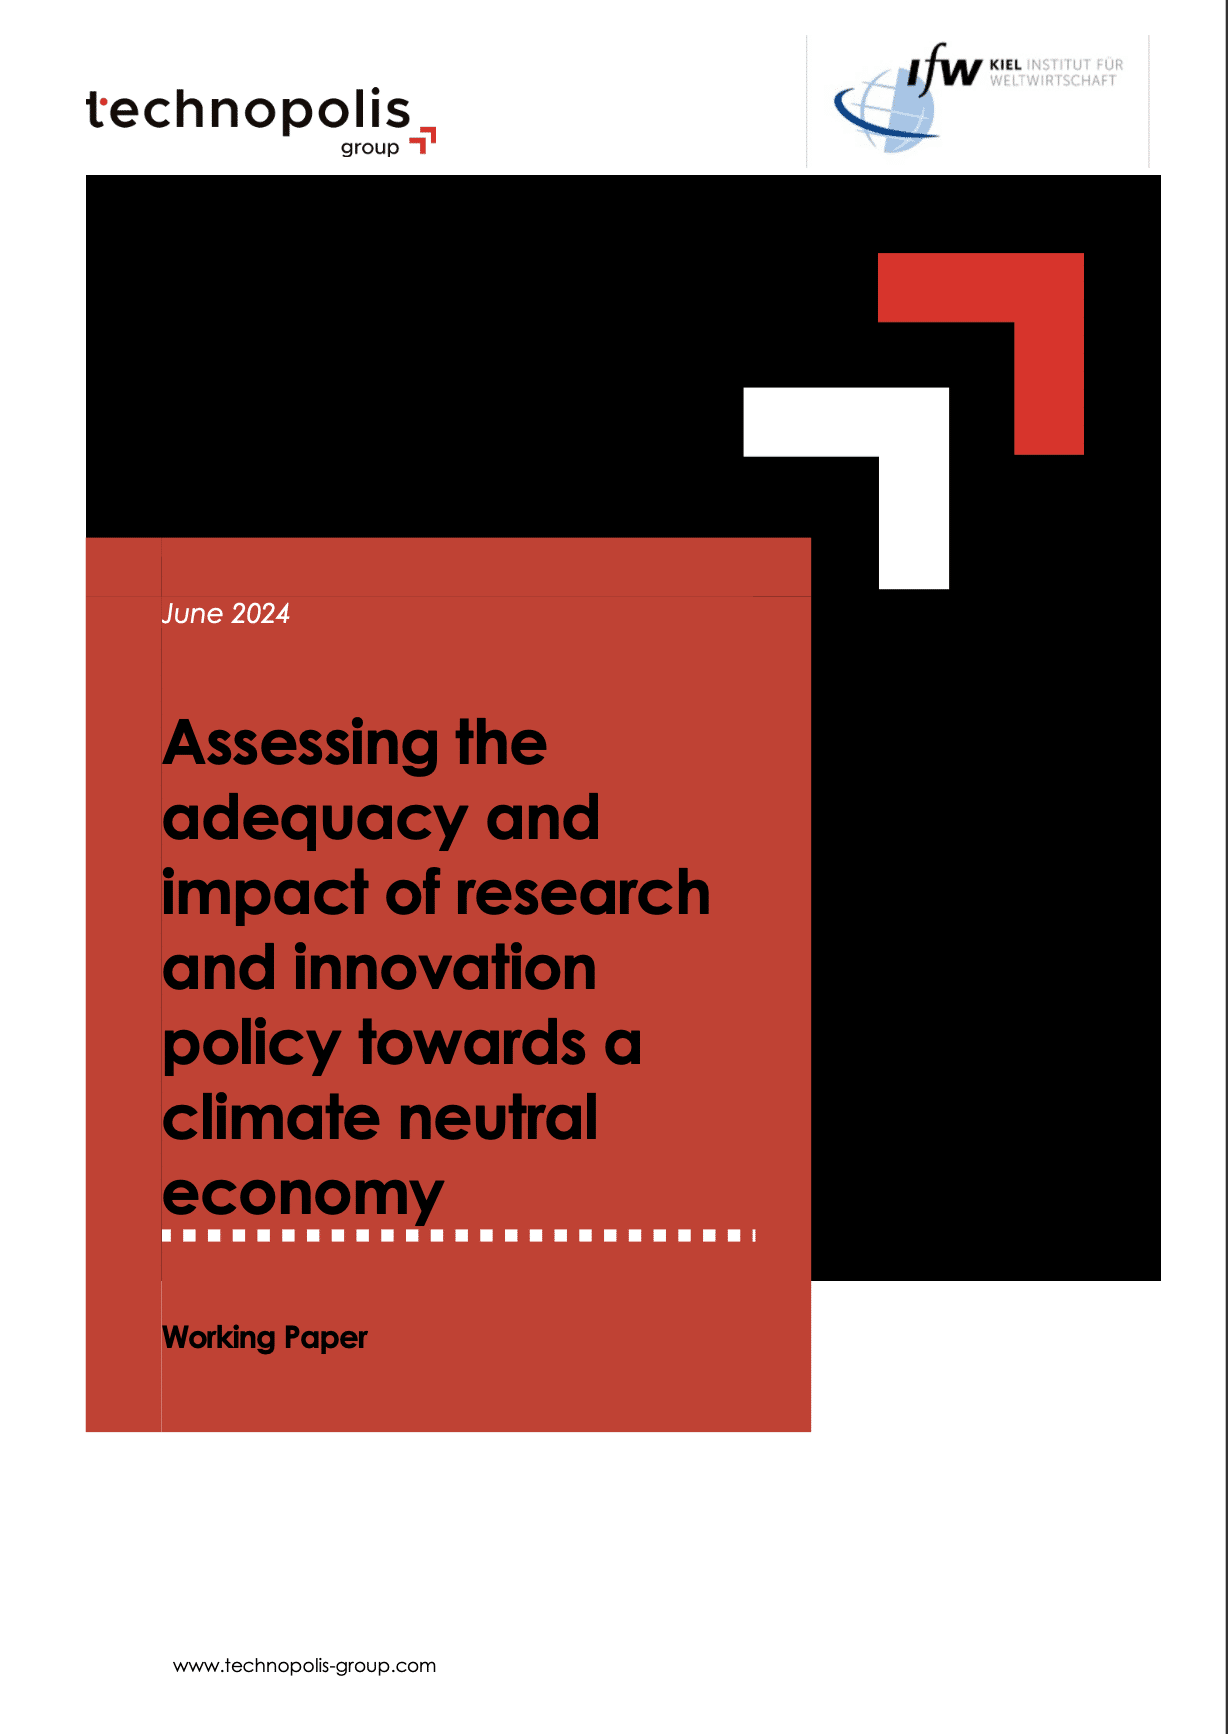 Assessing the adequacy and impact of research and innovation policy towards a climate neutral economy